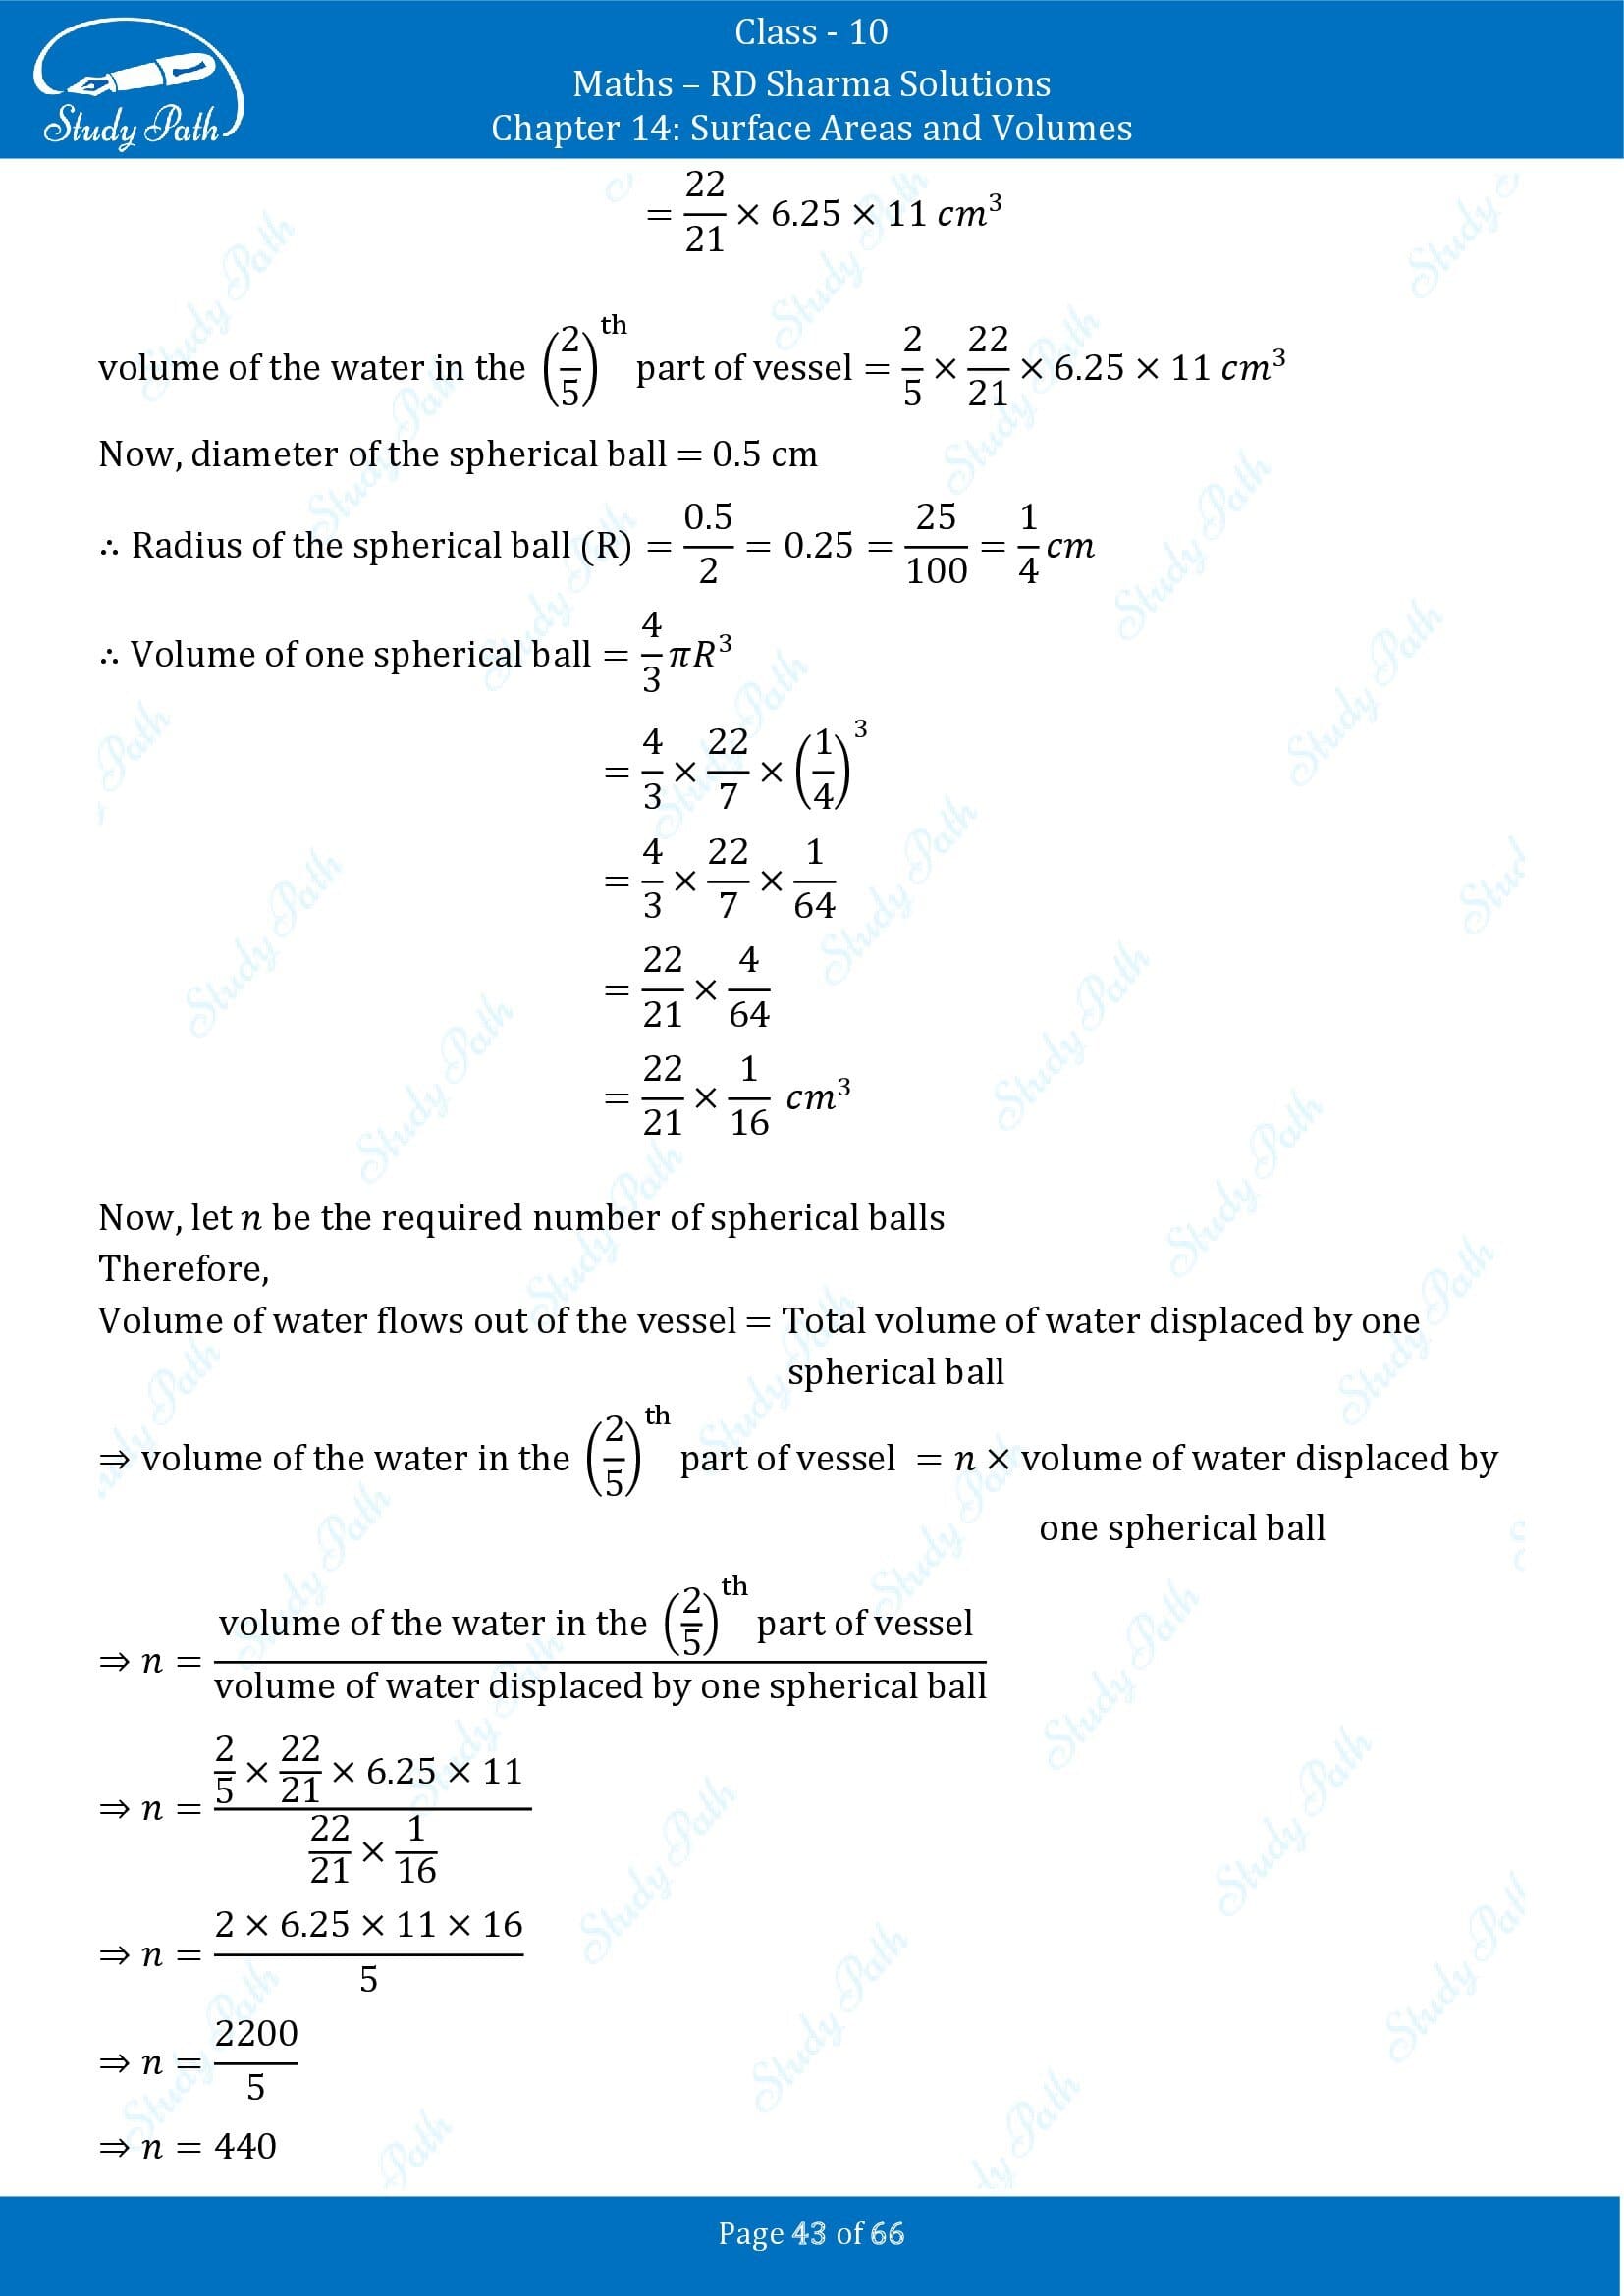 RD Sharma Solutions Class 10 Chapter 14 Surface Areas and Volumes Exercise 14.1 00043